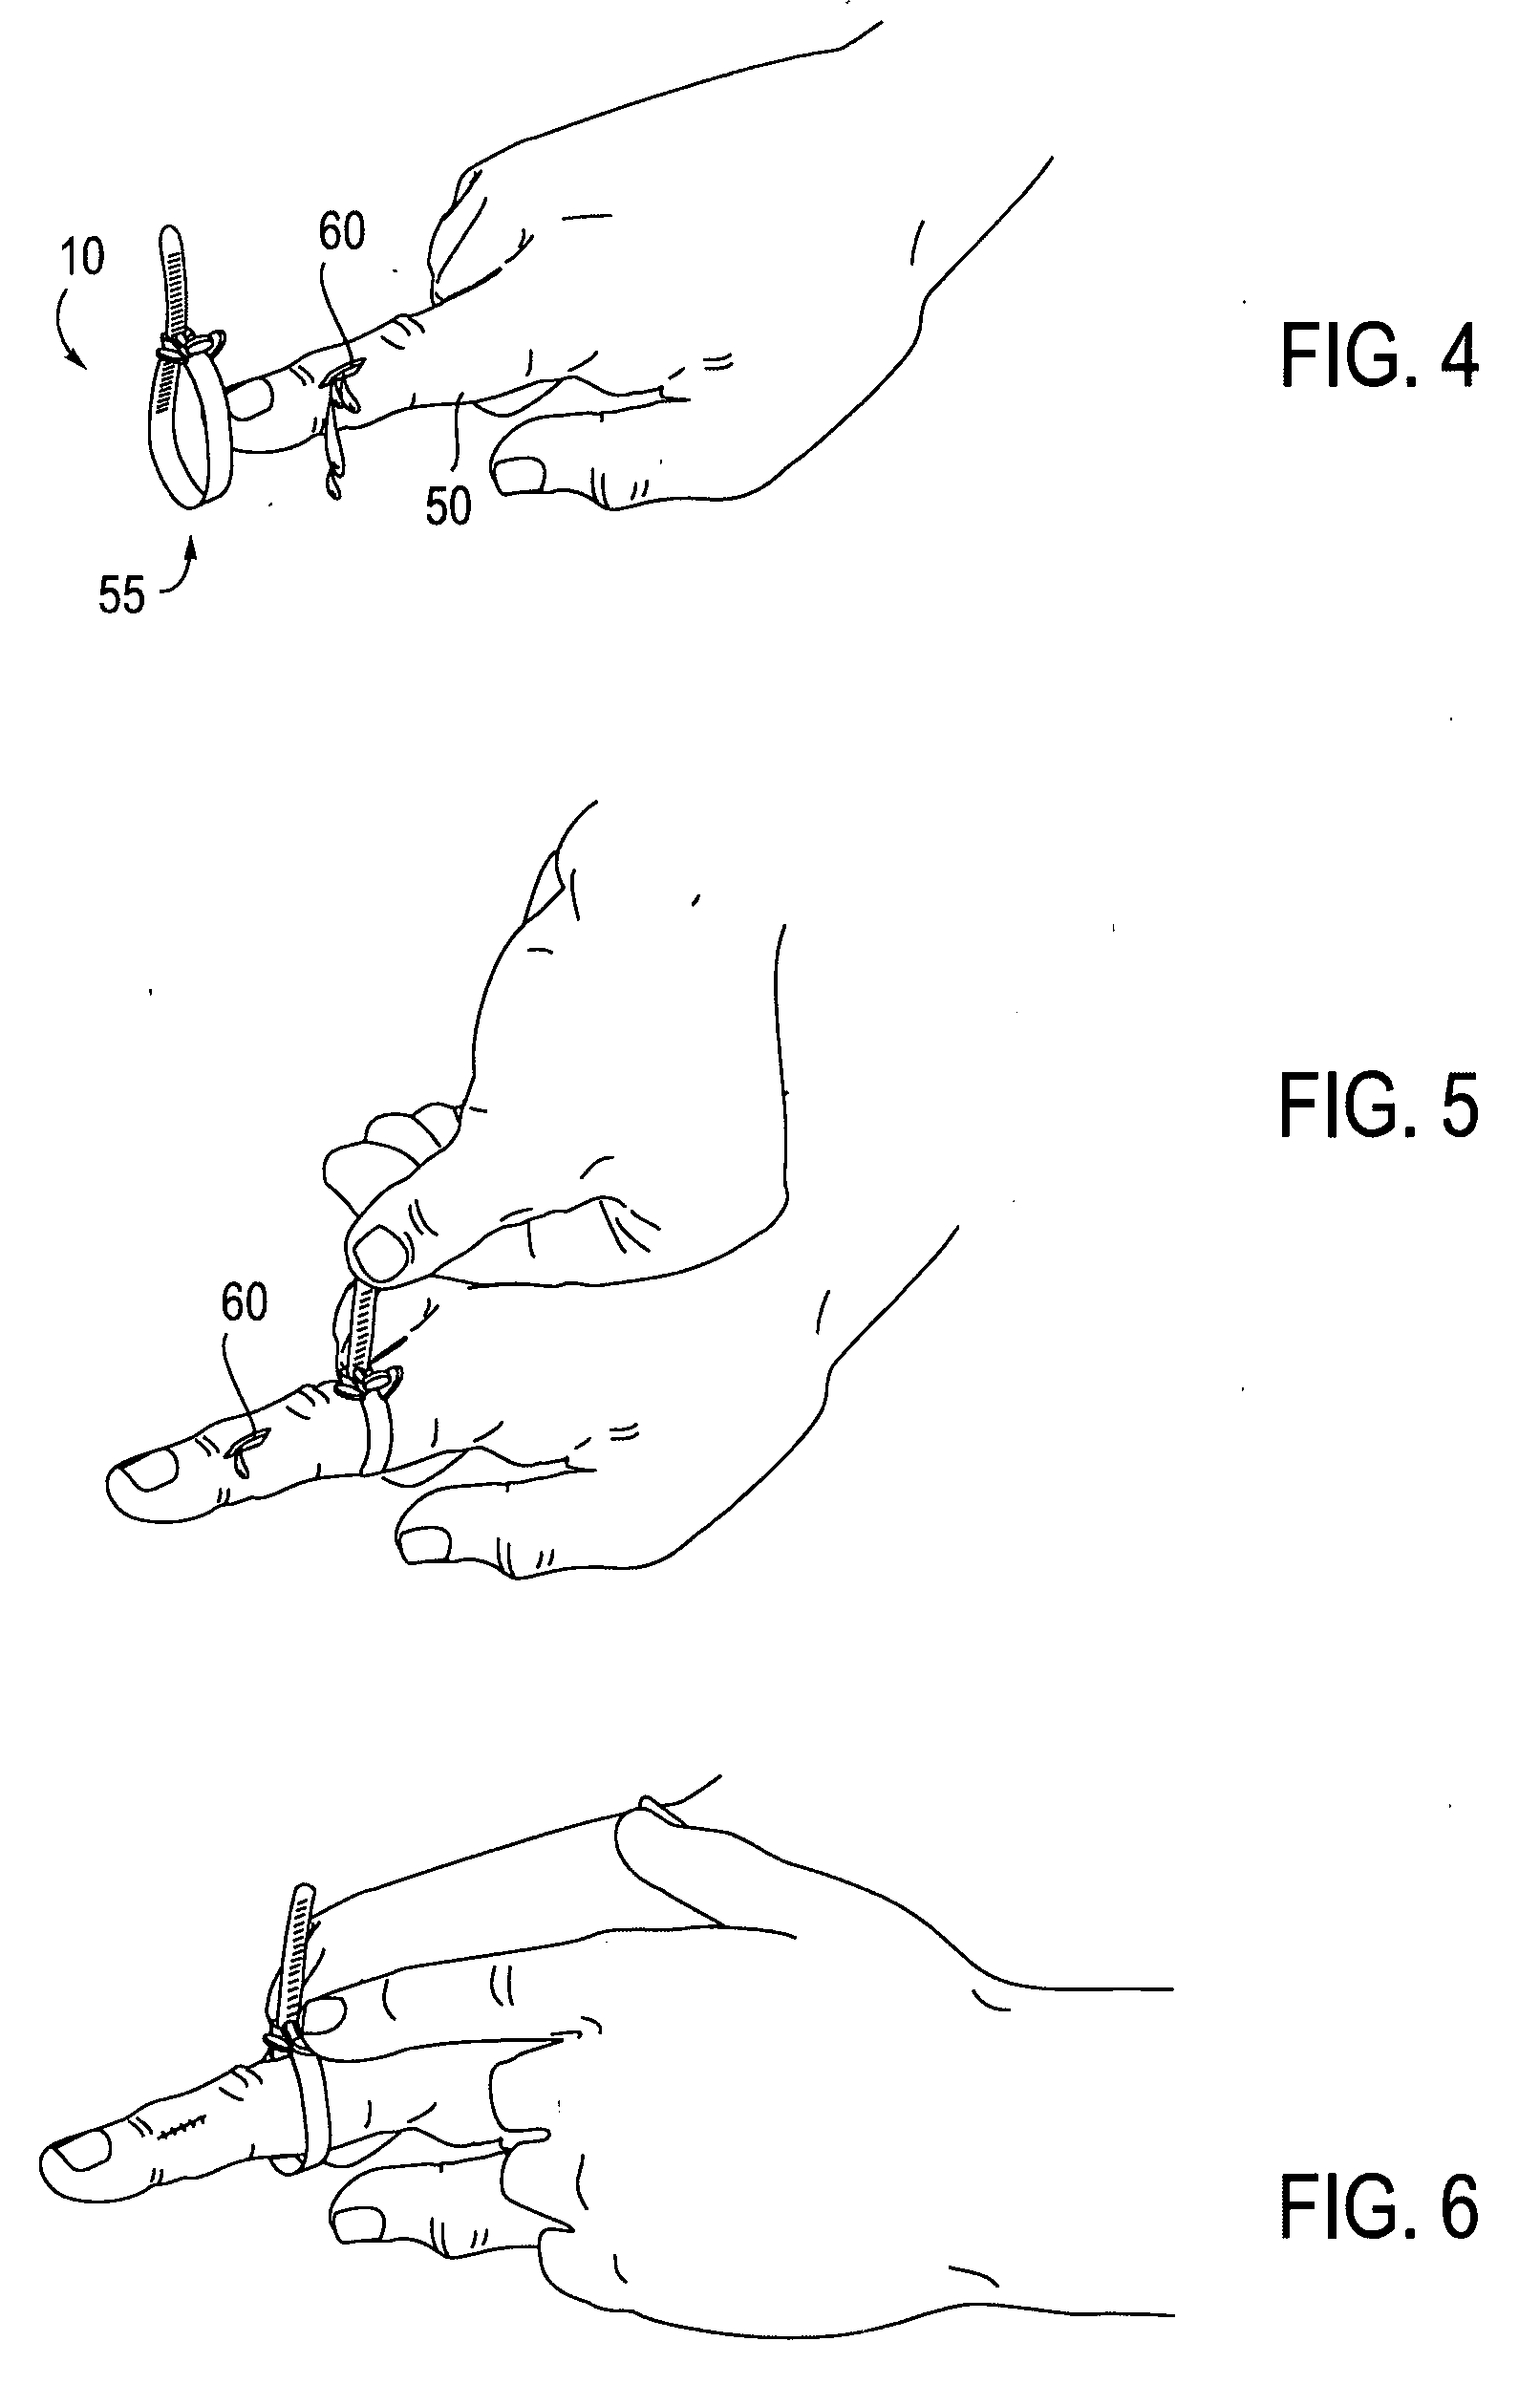 Method and apparatus for restricting blood flow